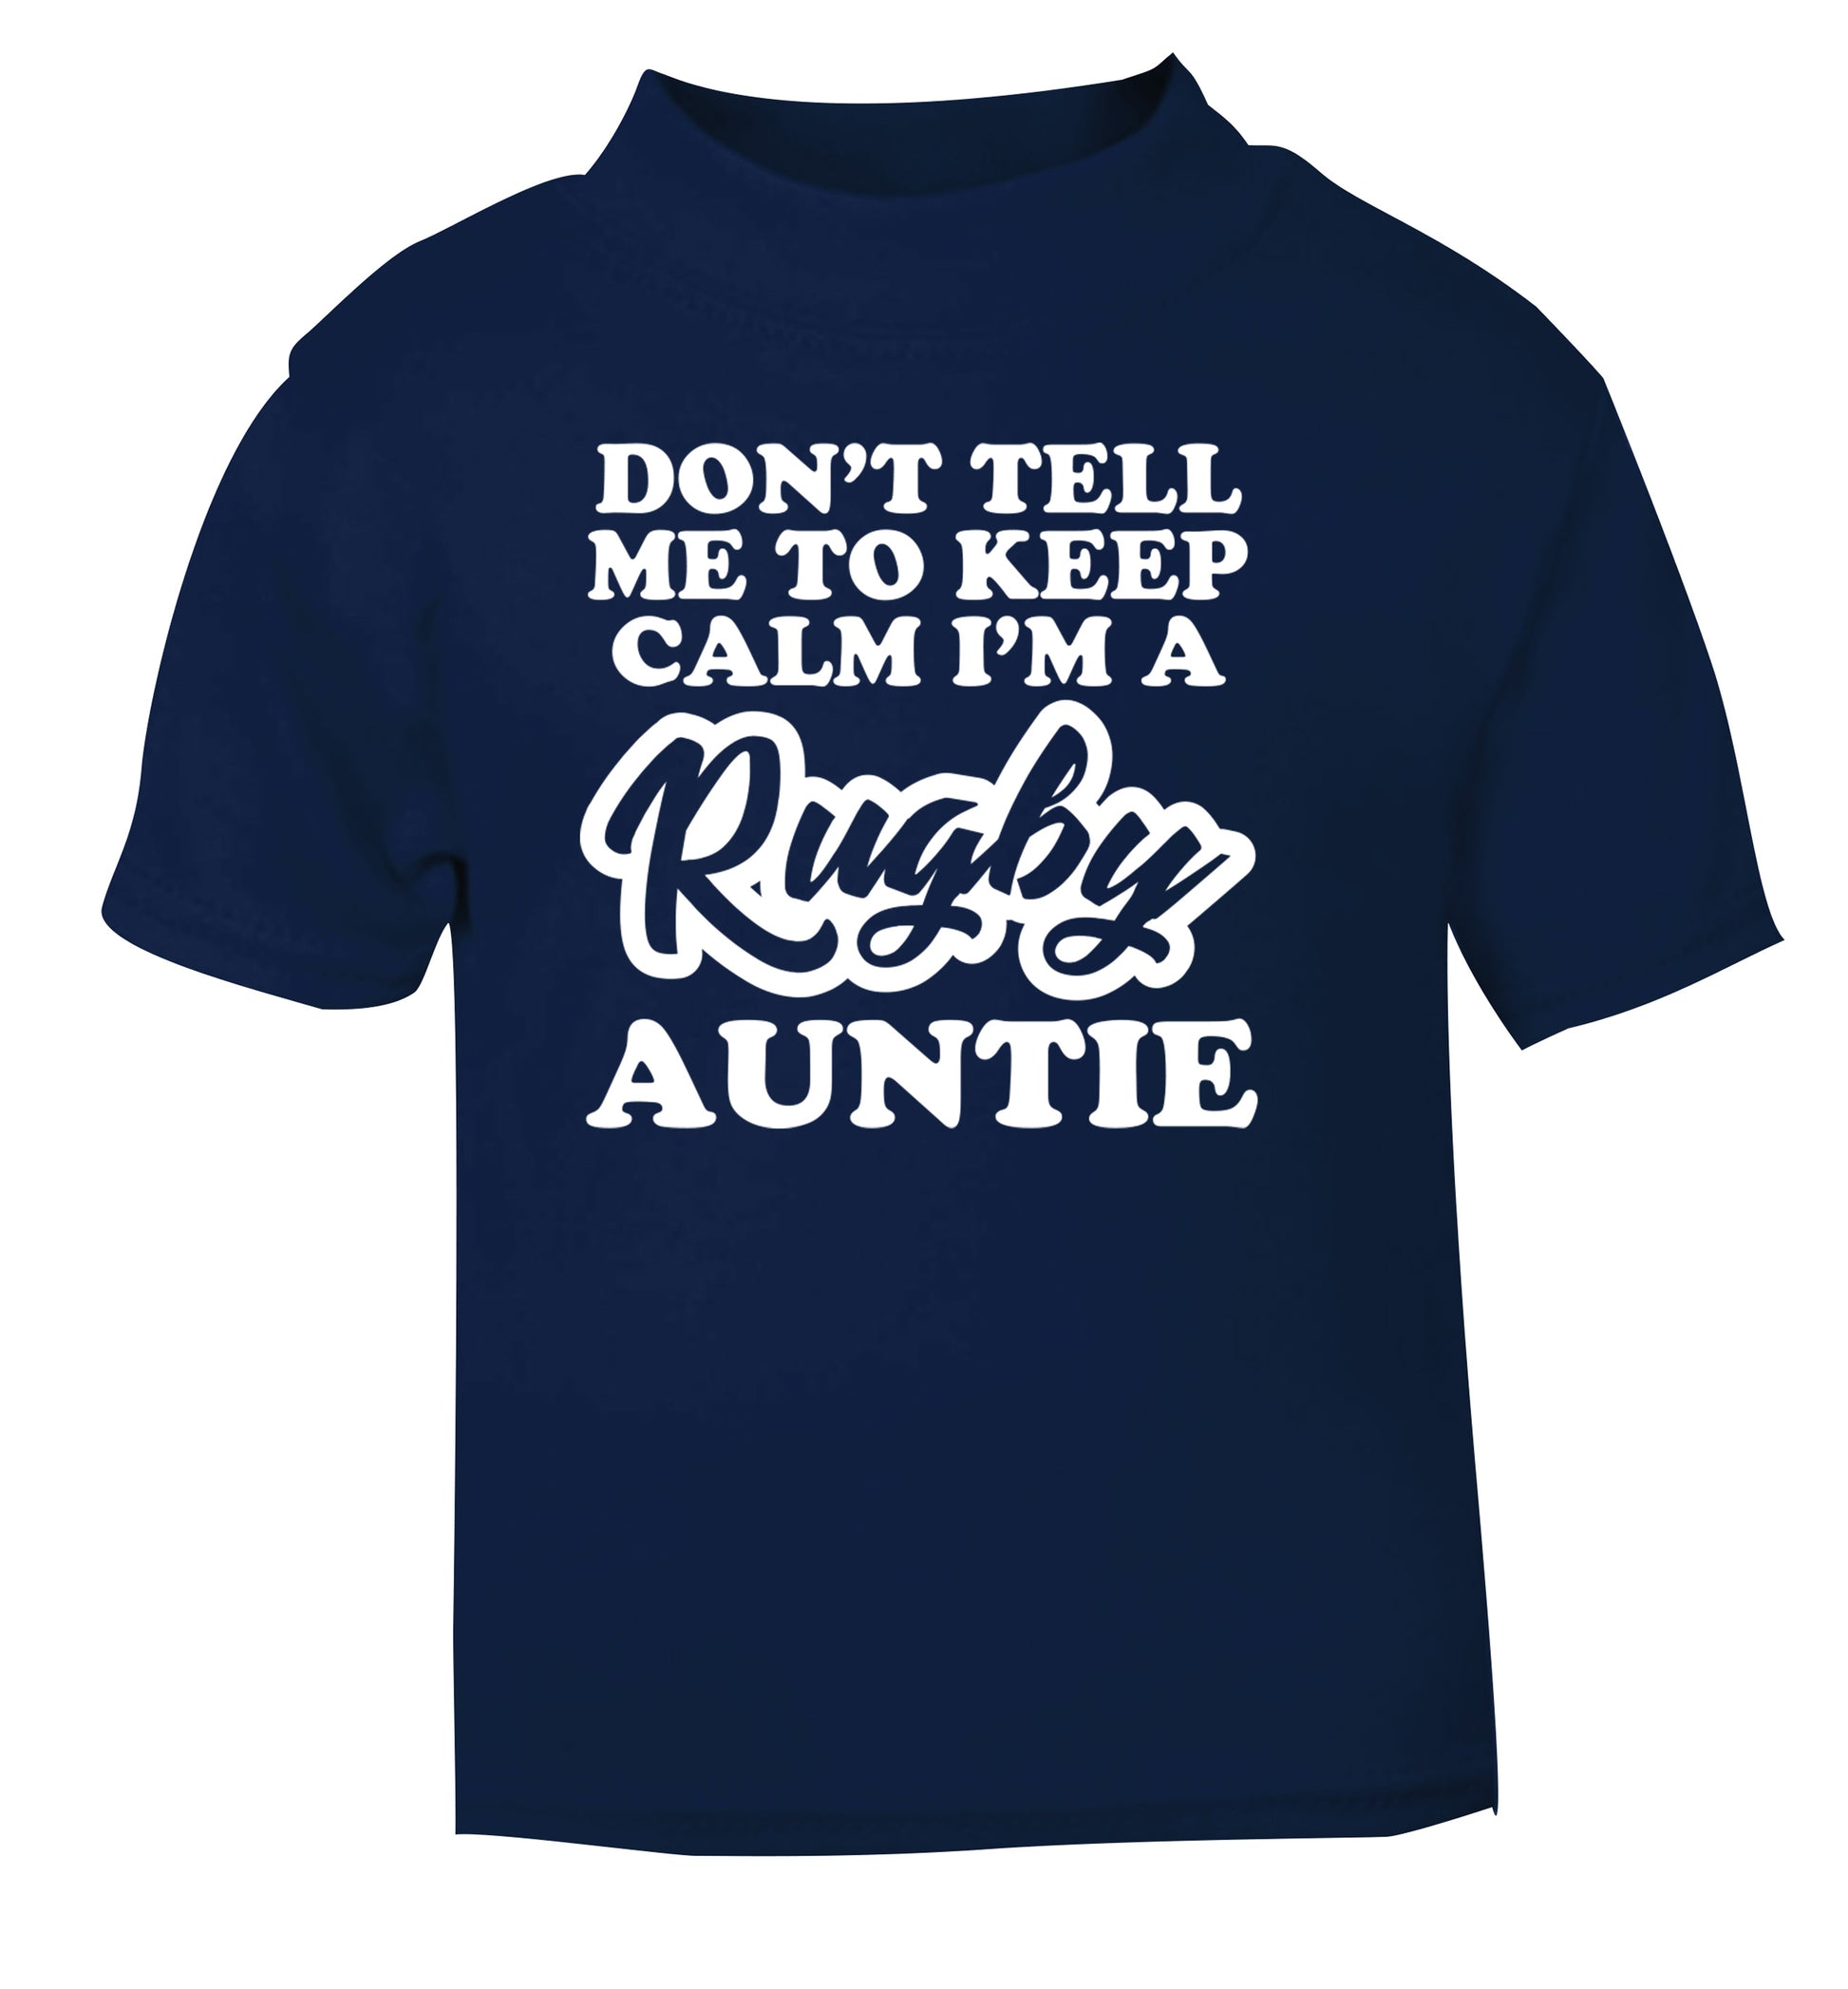 Don't tell me keep calm I'm a rugby auntie navy Baby Toddler Tshirt 2 Years